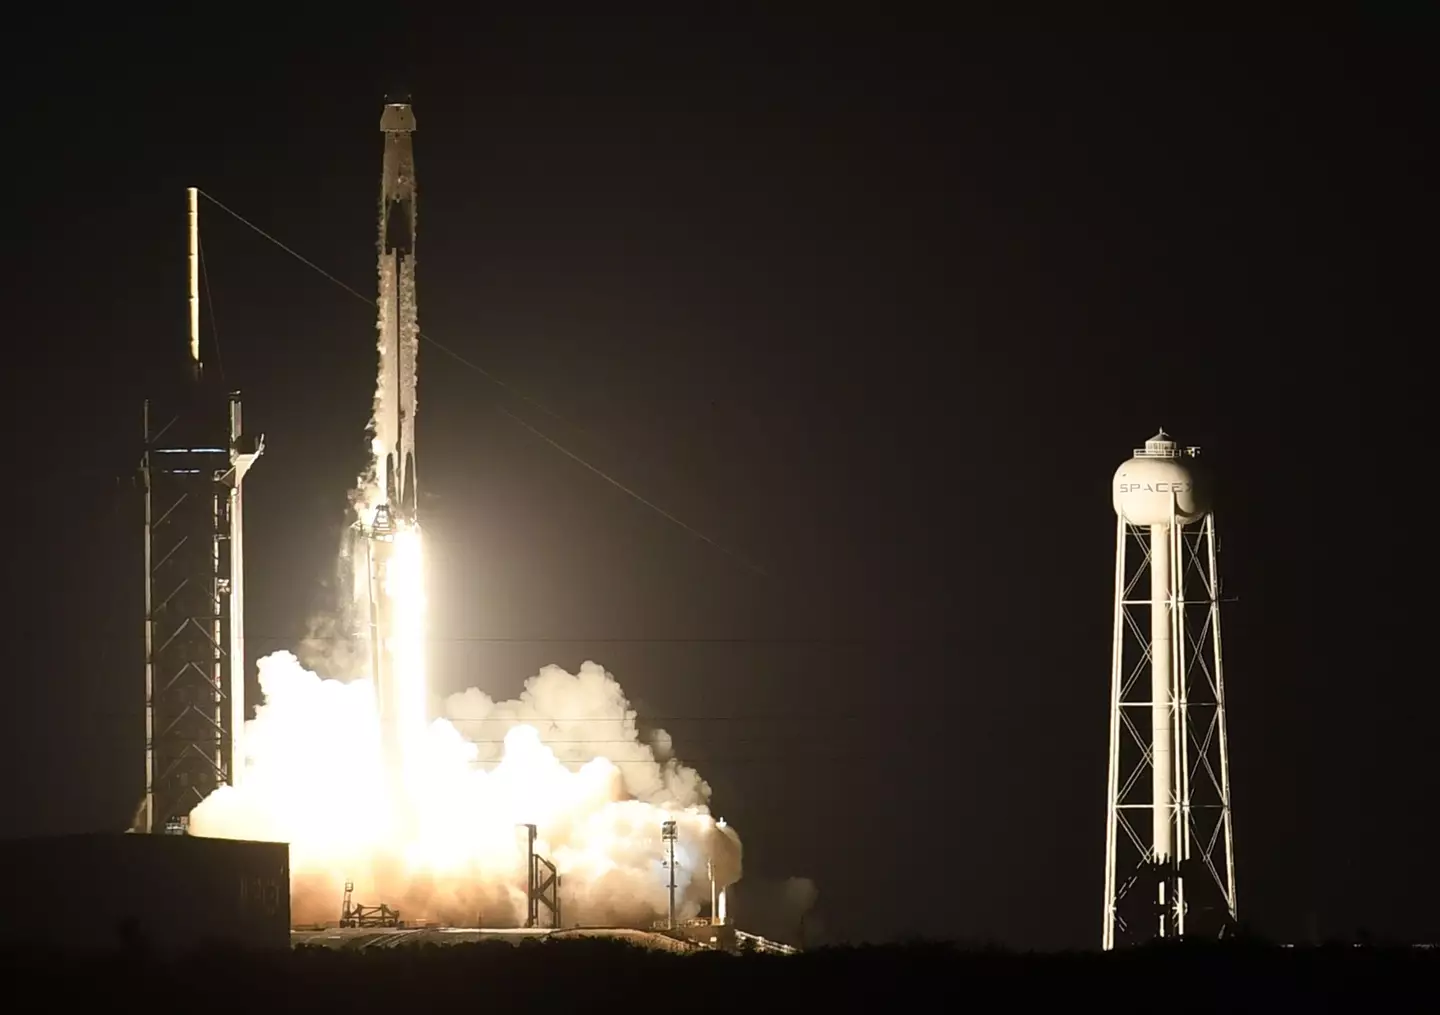 The SpaceX craft is preparing to deorbit after nearly two years.